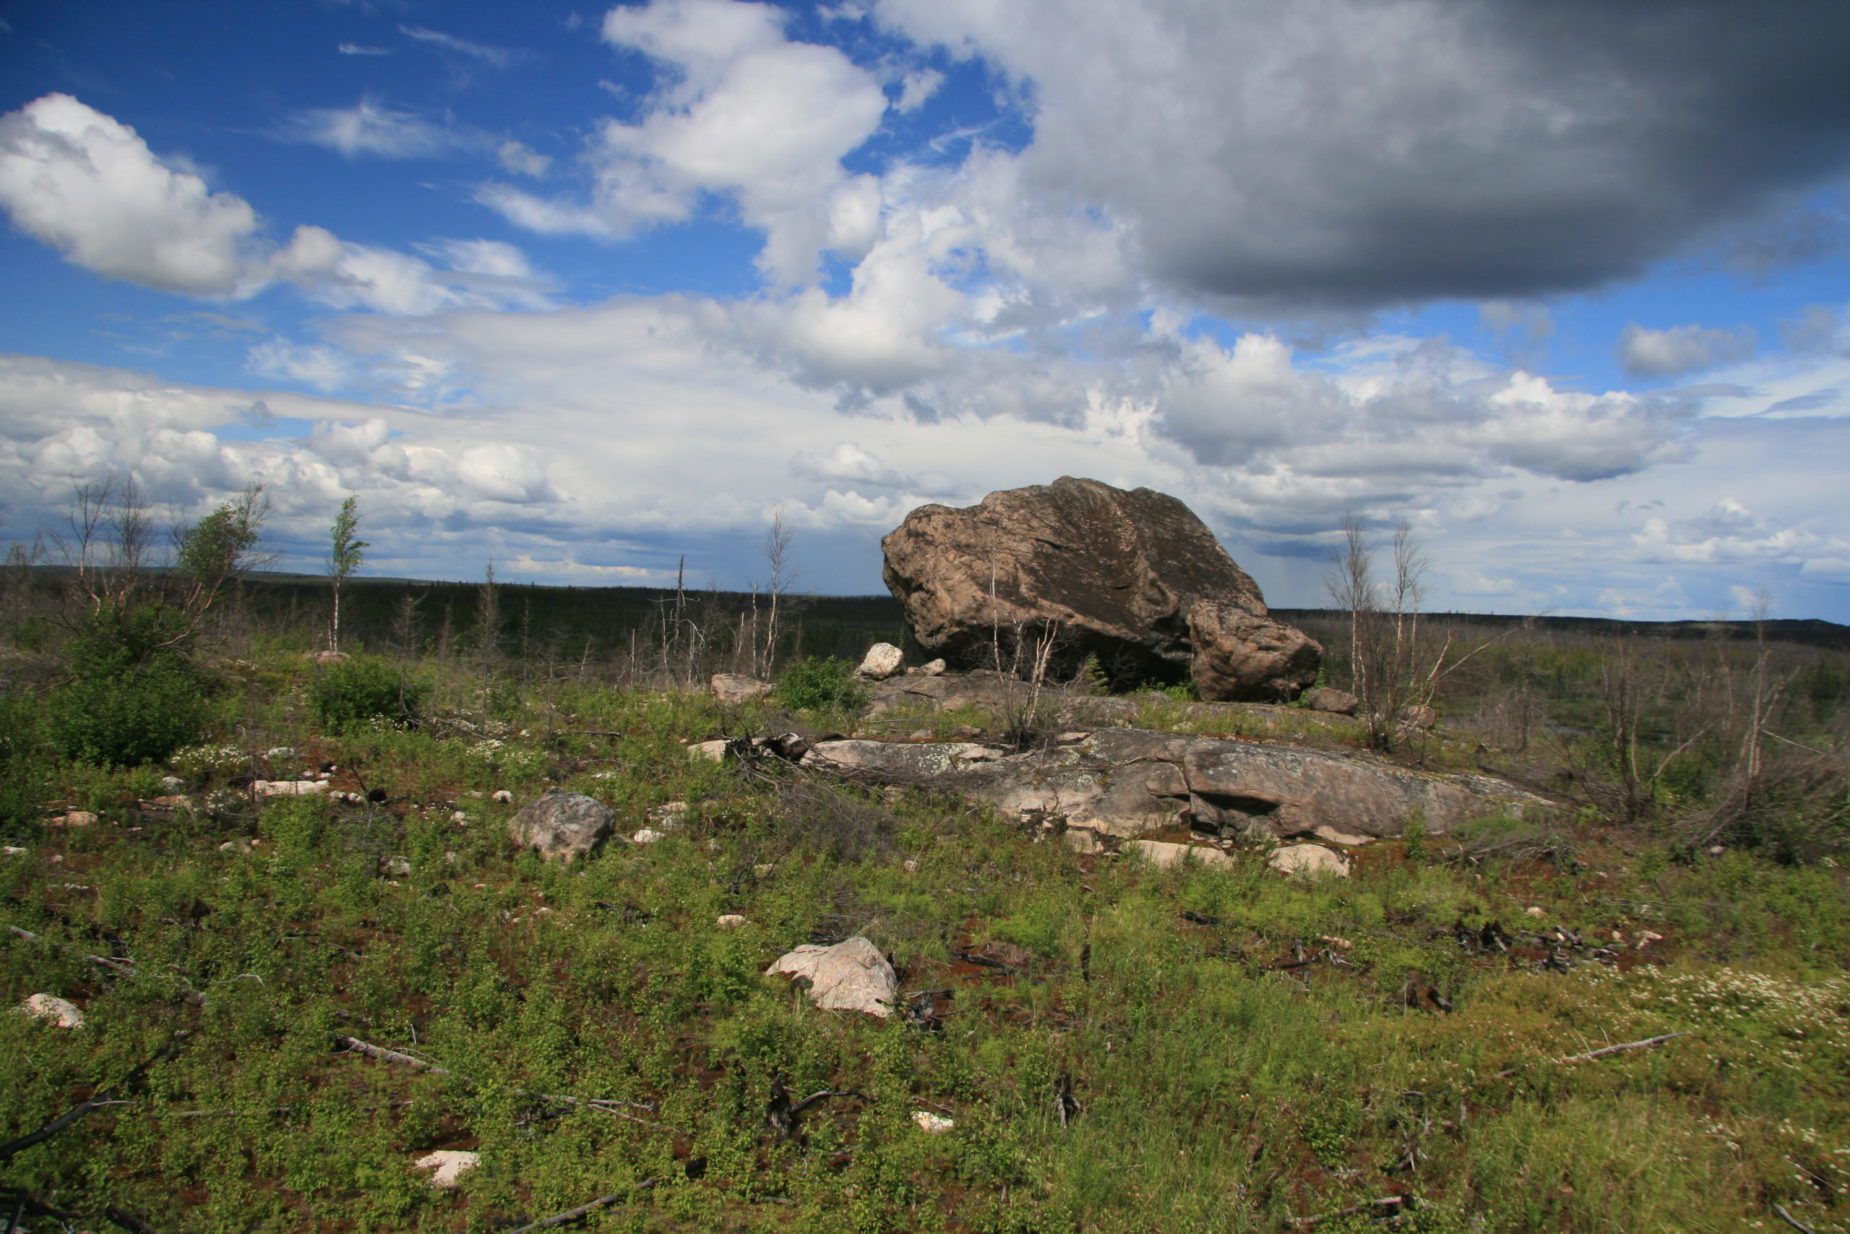 landscape of the eskers with a large rock, greenery, and blue skies with fluffy clouds